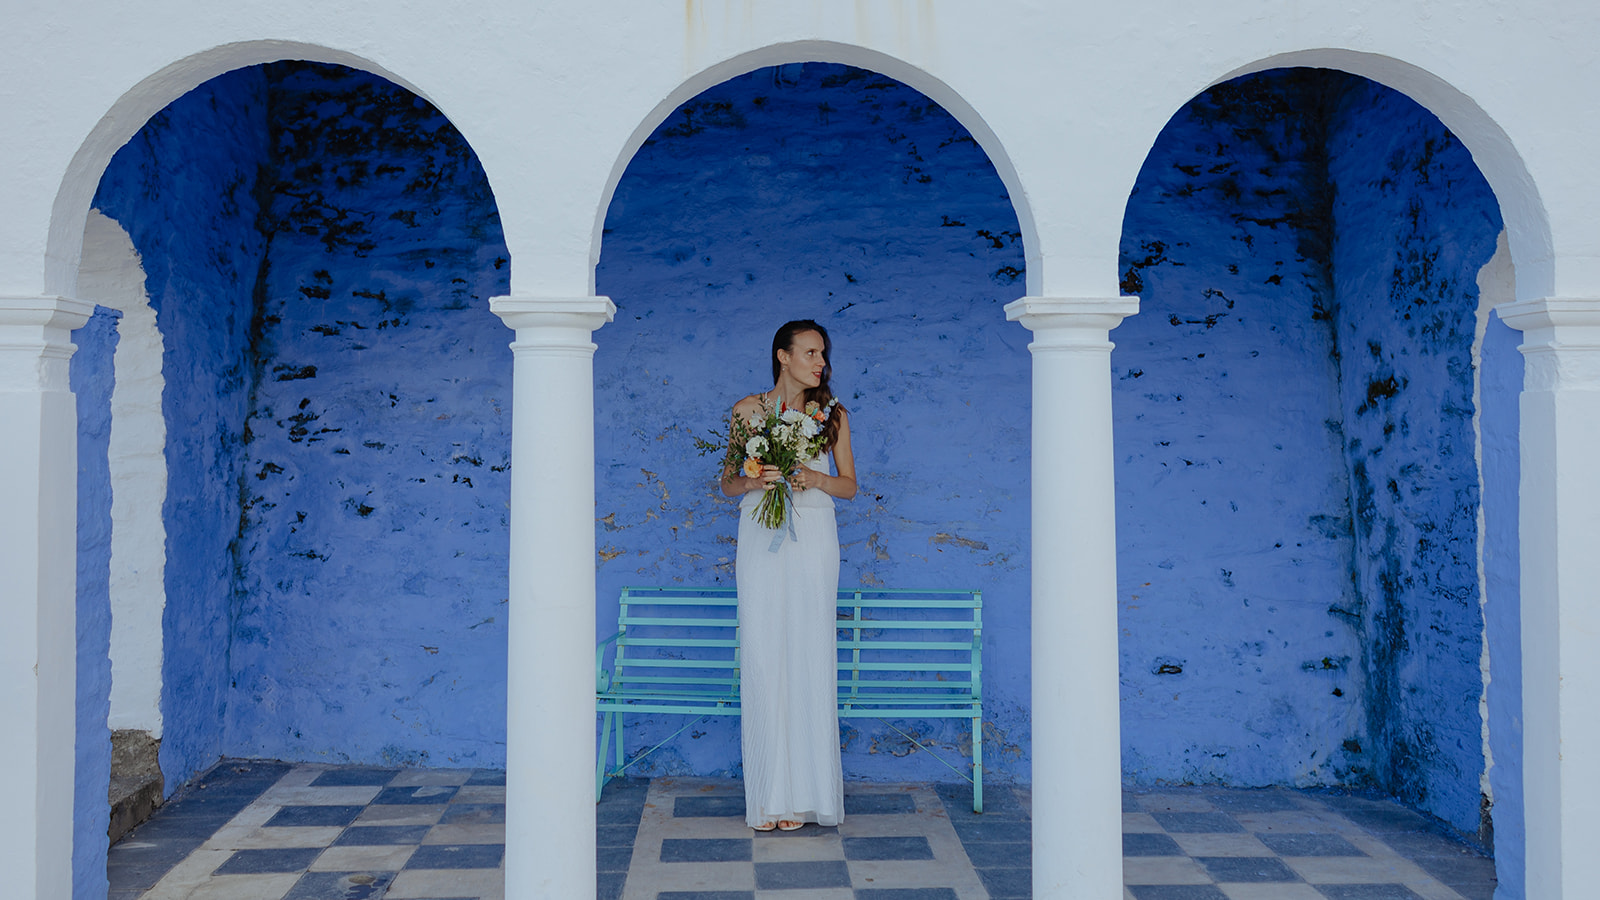 bride under arches with blue wall at Frances quinn wedding in wales